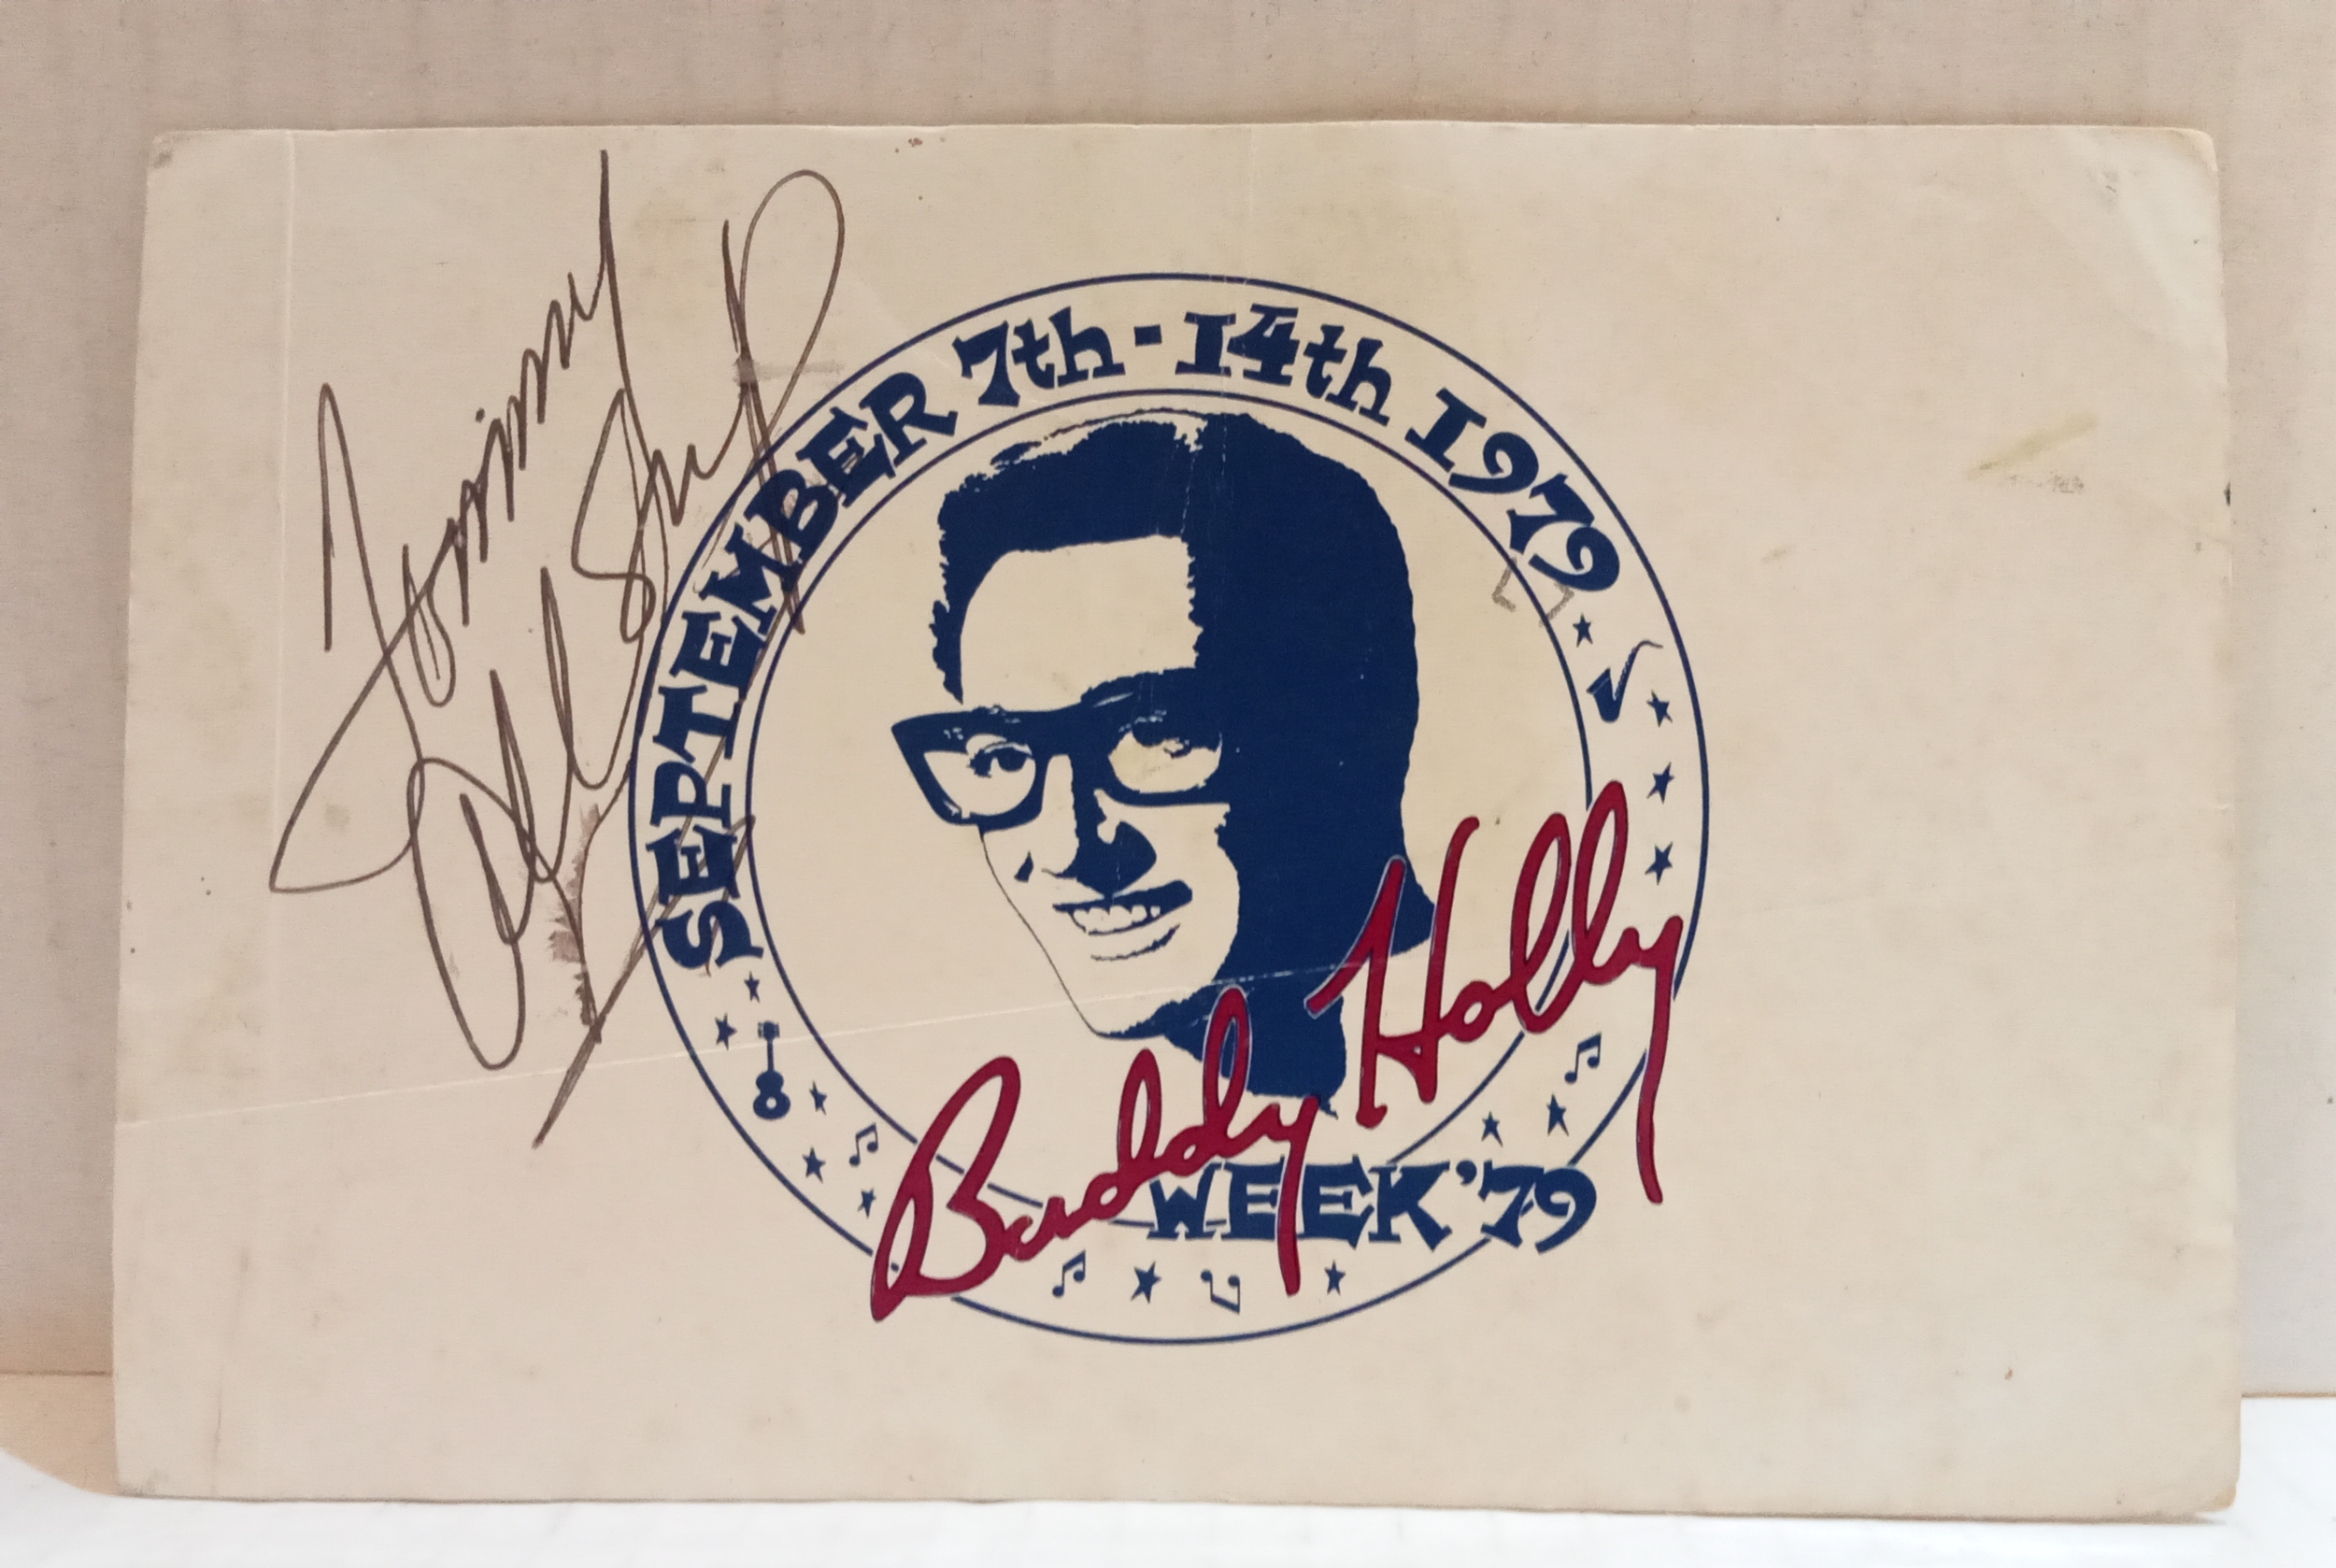 Buddy Holly Week 1979 MPL promotional postcard signed by Tommy Allsup.